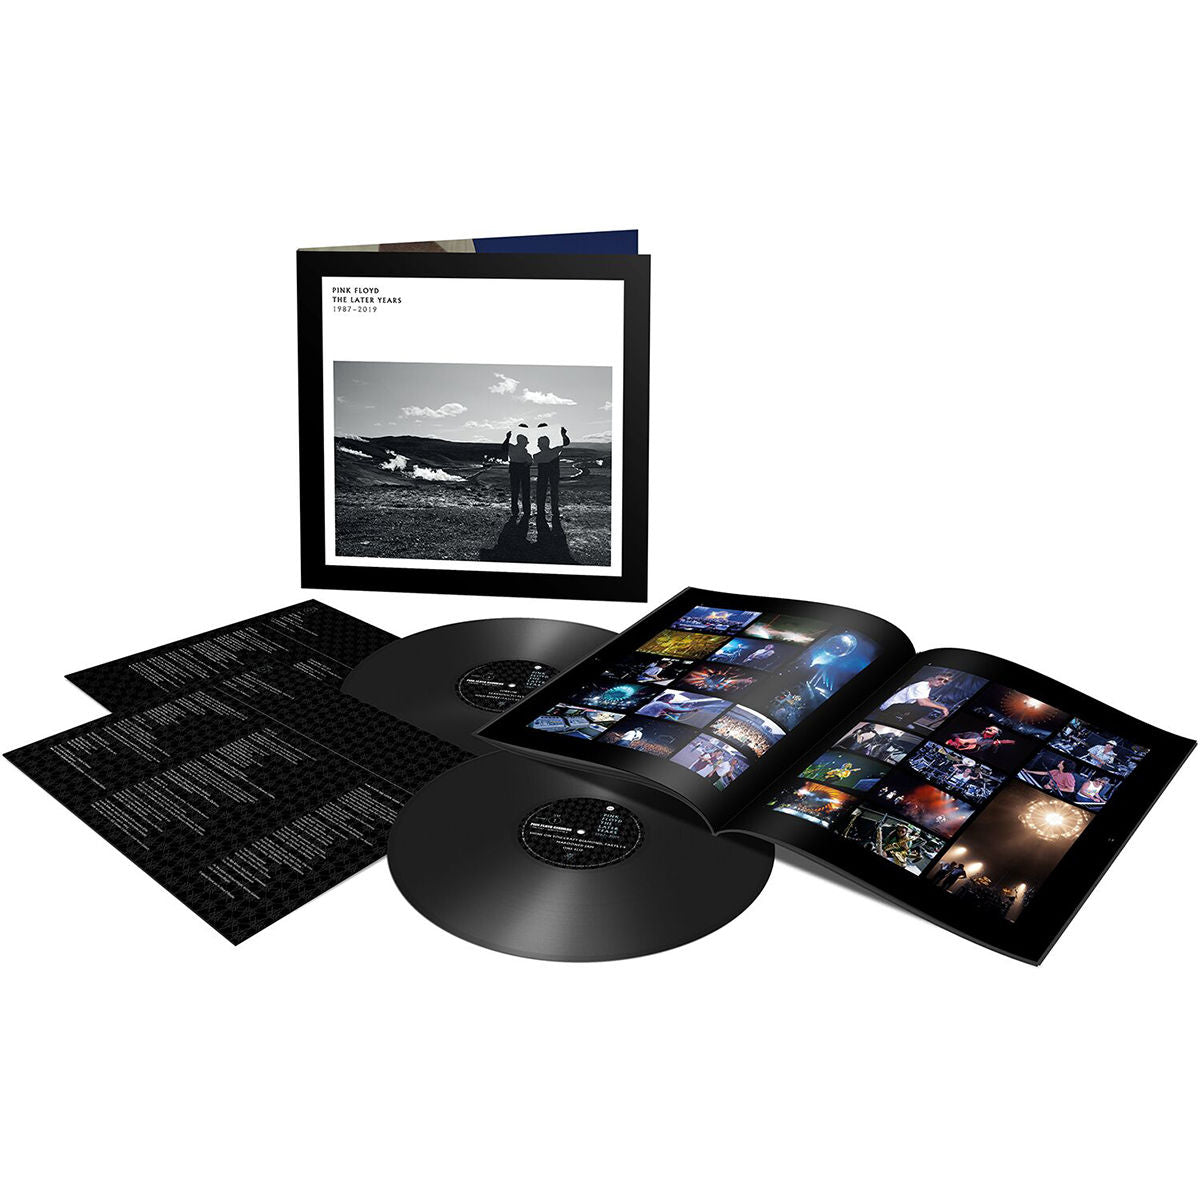 Pink Floyd - The Later Years 1987 - 2019: Deluxe Vinyl 2LP